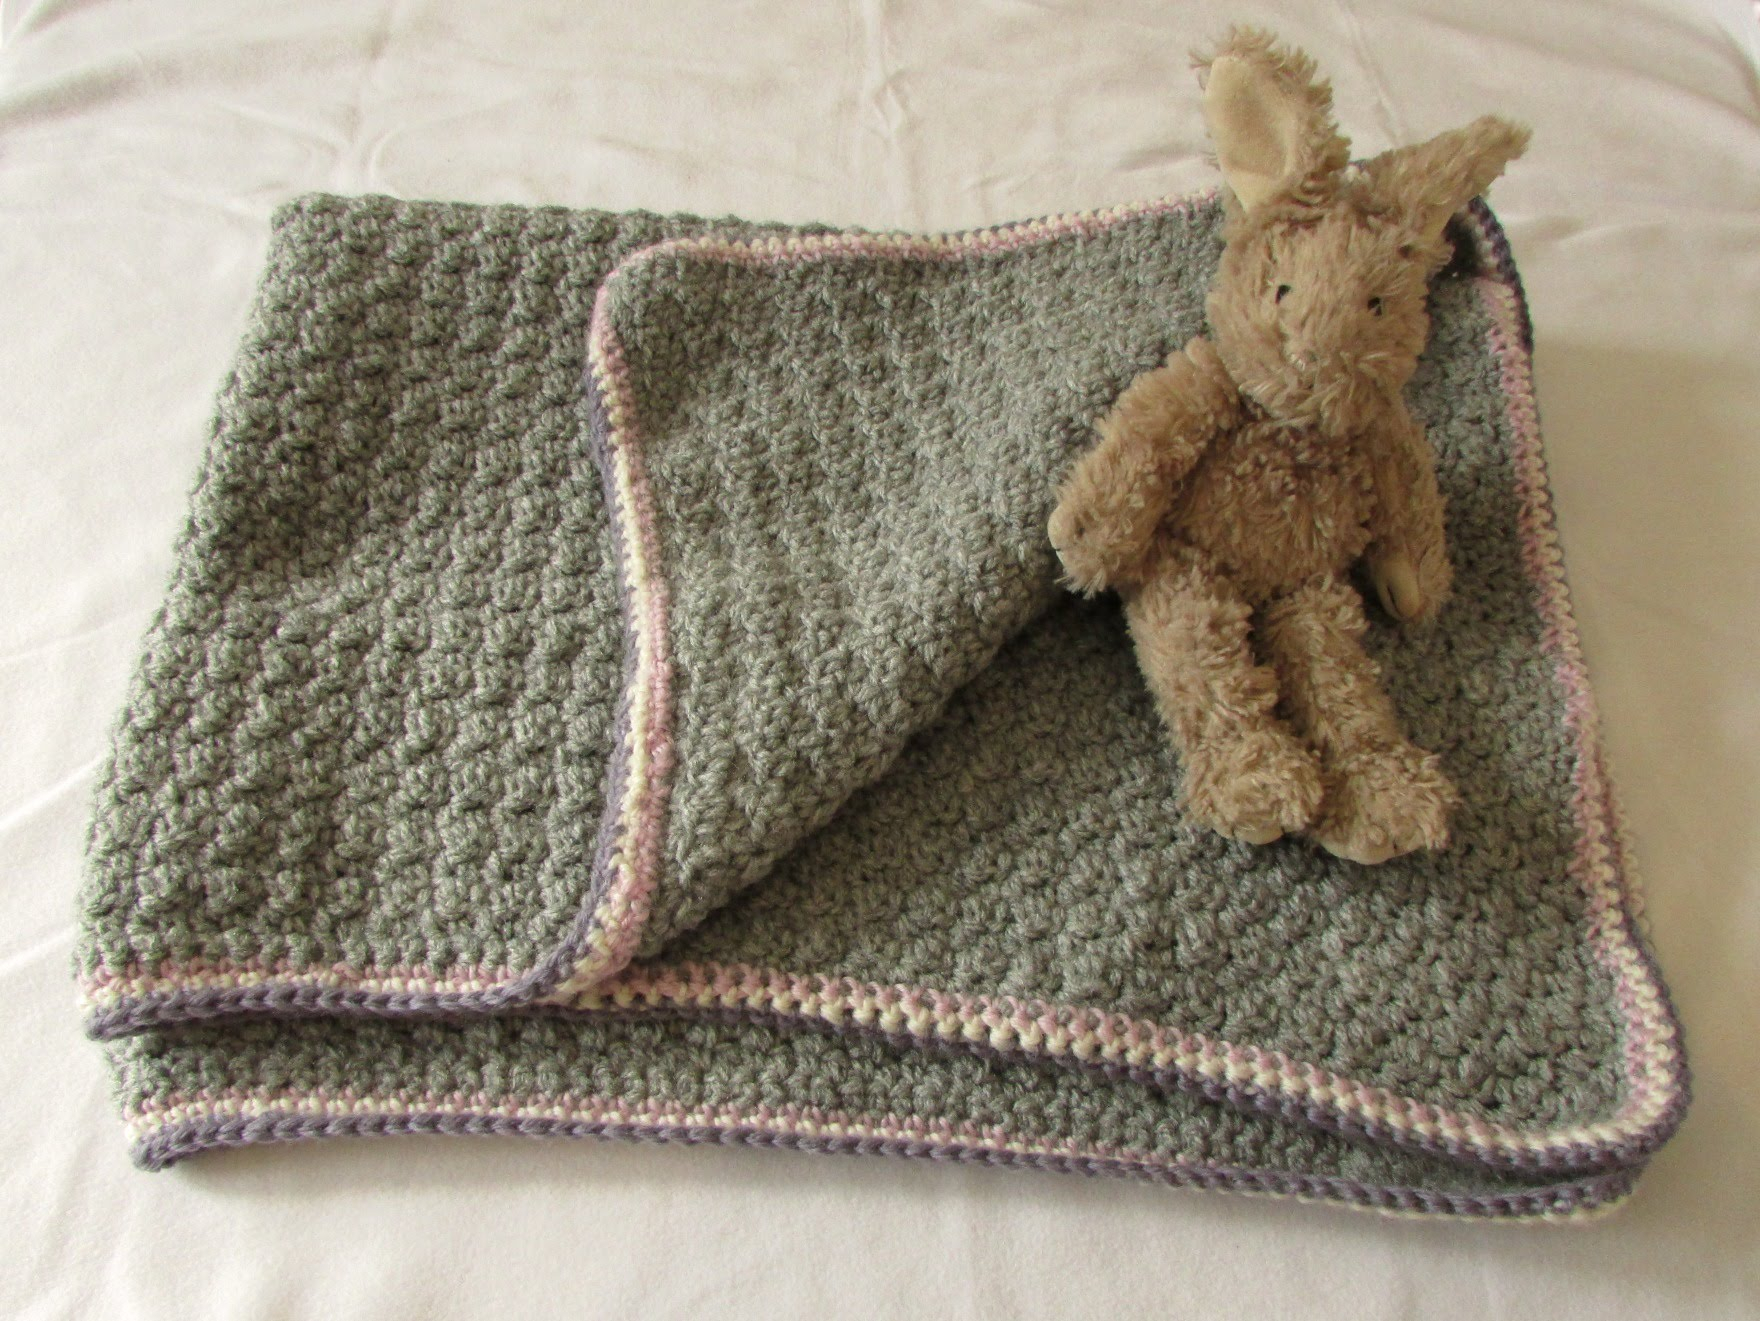 Easy Knitting Pattern For Baby Blanket Three Easy Crochet Ba Blanket Ideas Crochet And Knitting